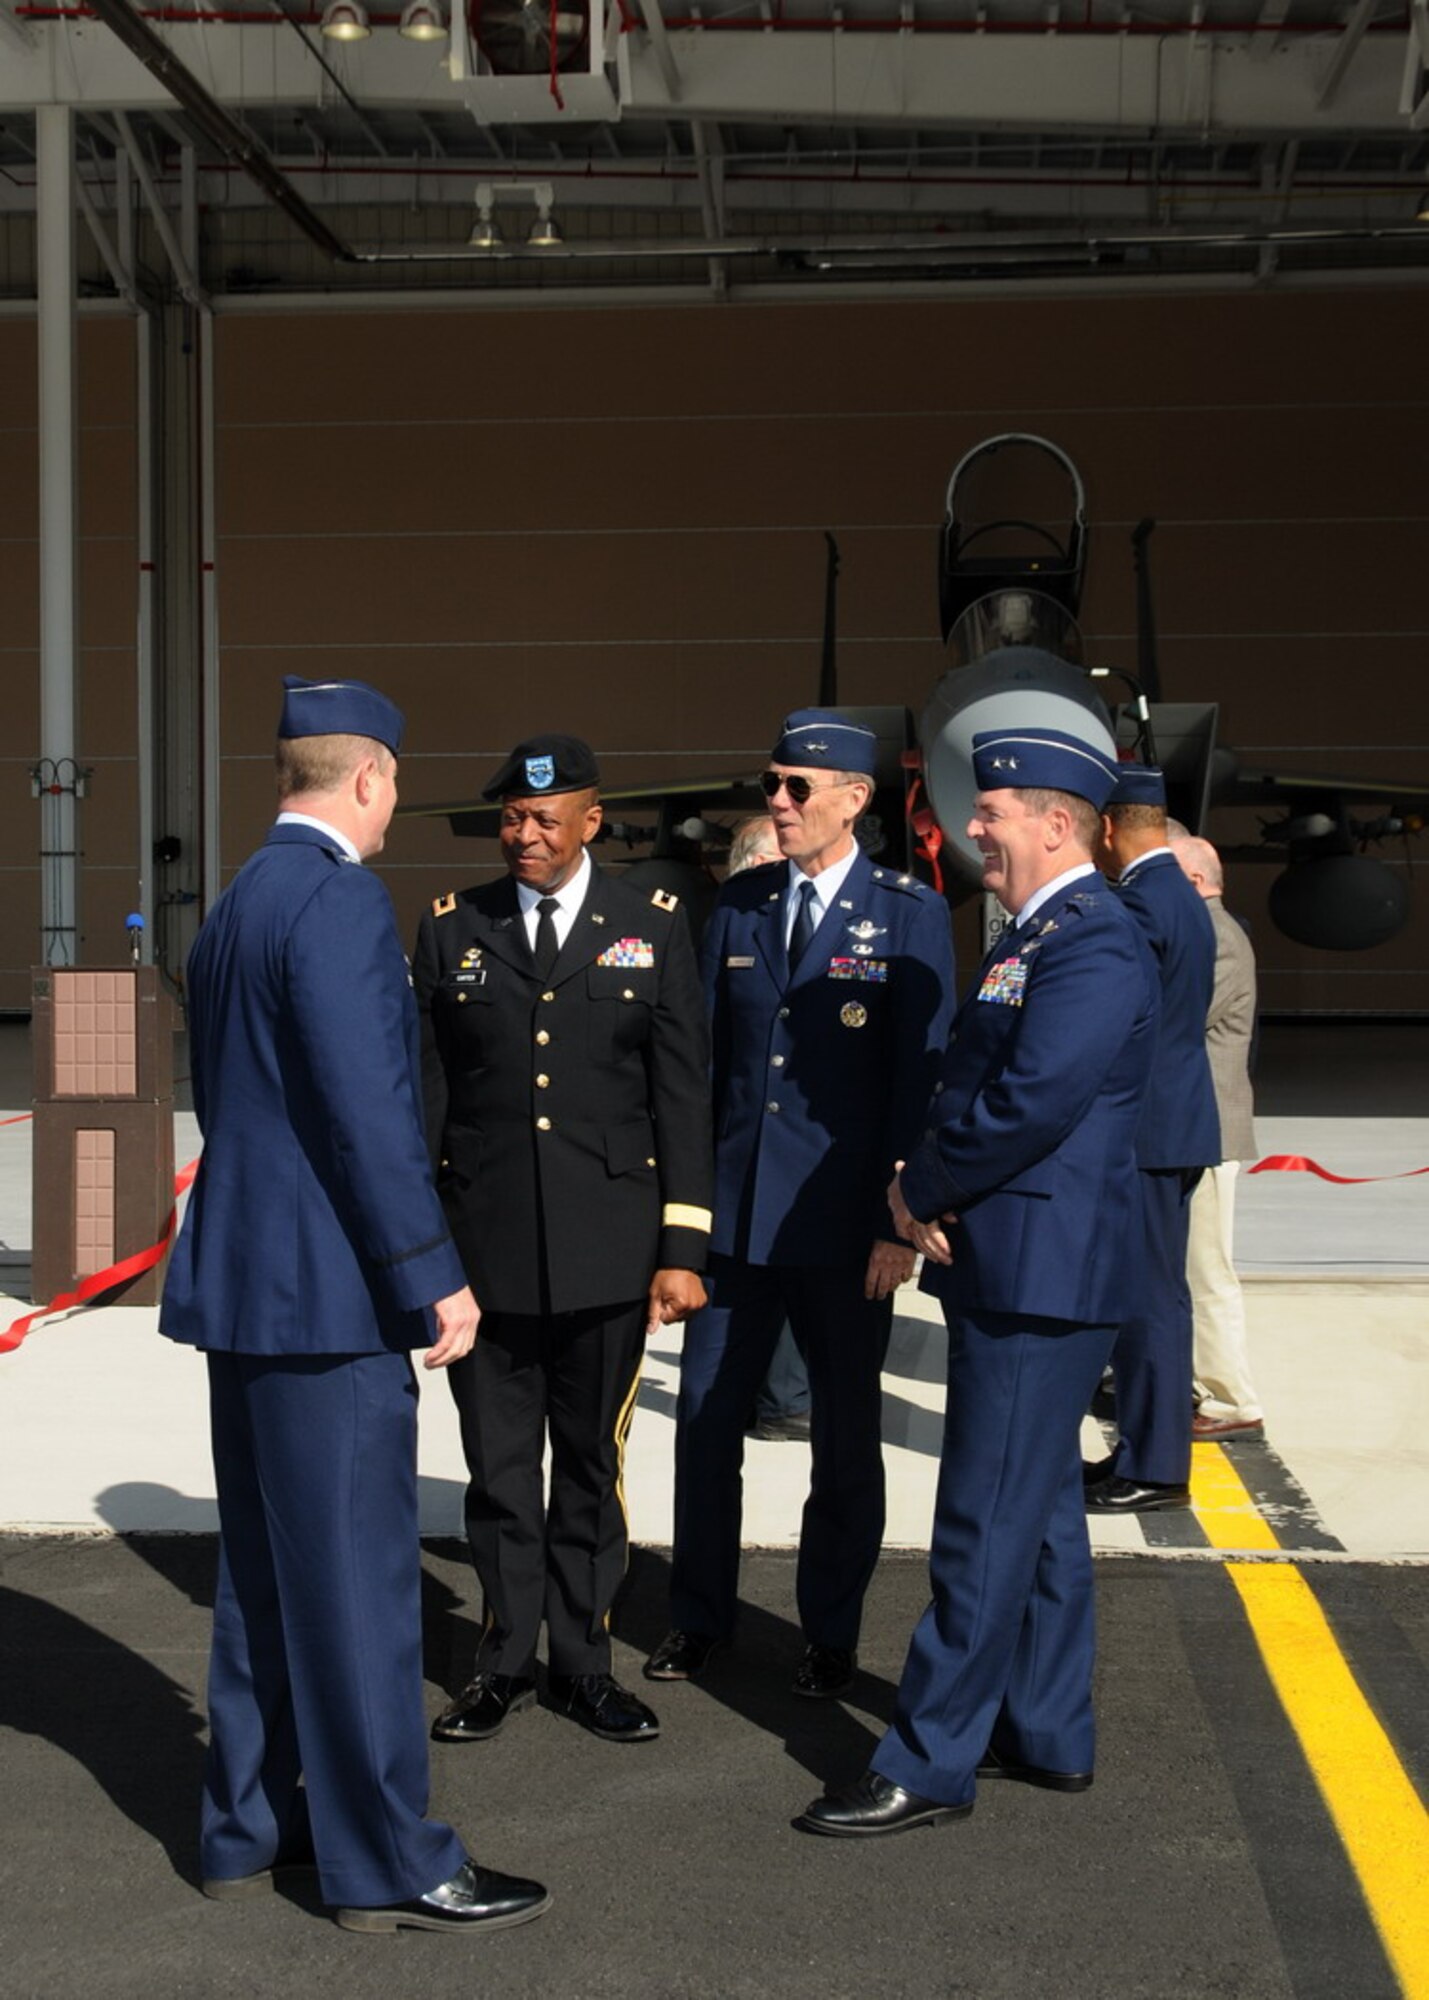 Commanders stand in front of the new Air Sovereignty Alert hangar at the 104th Fighter Wing, Massachusetts Air National Guard base in Westfield Massachusetts on April 10, 2010 just after the official ribbon cutting ceremony.  The wing officially accepted the alert mission on February 15, 2010, and stands ready to defend the homeland if called upon.  (photograph by Senior Master Sgt. Robert J. Sabonis)